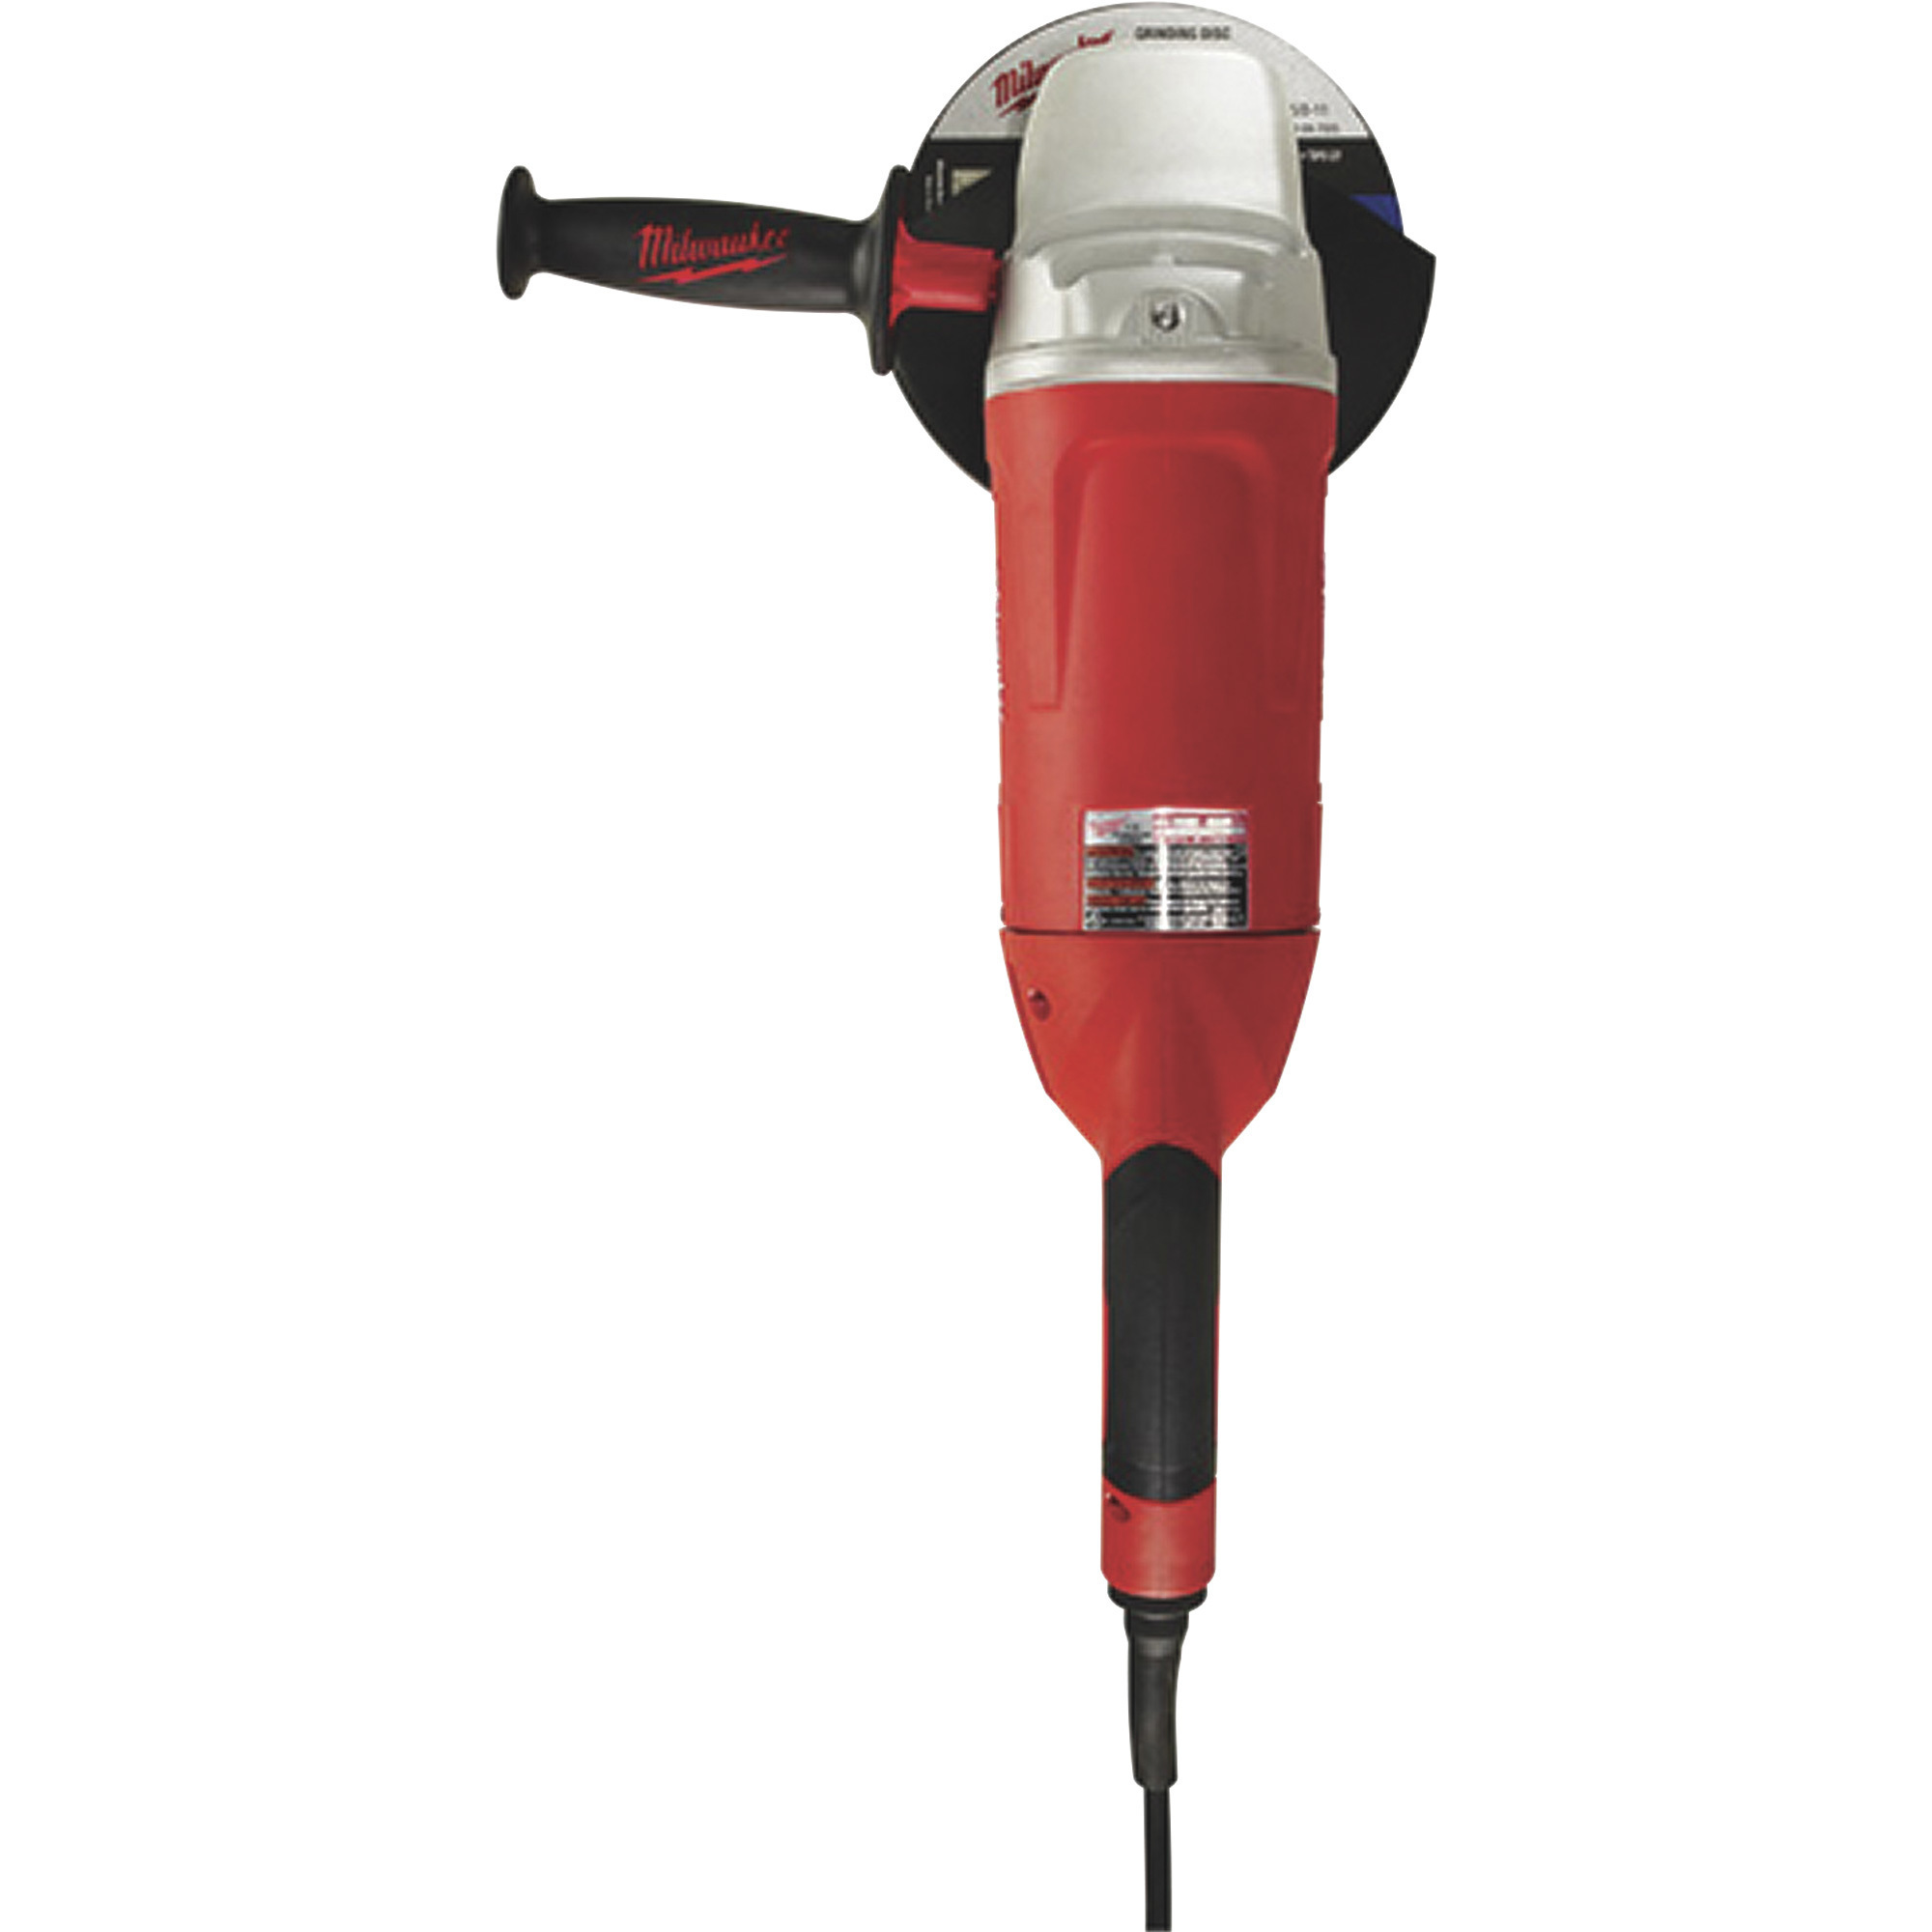 Milwaukee 7in. or 9in. Grinder, 15 Amp, 6000 RPM, Model# 6088-30